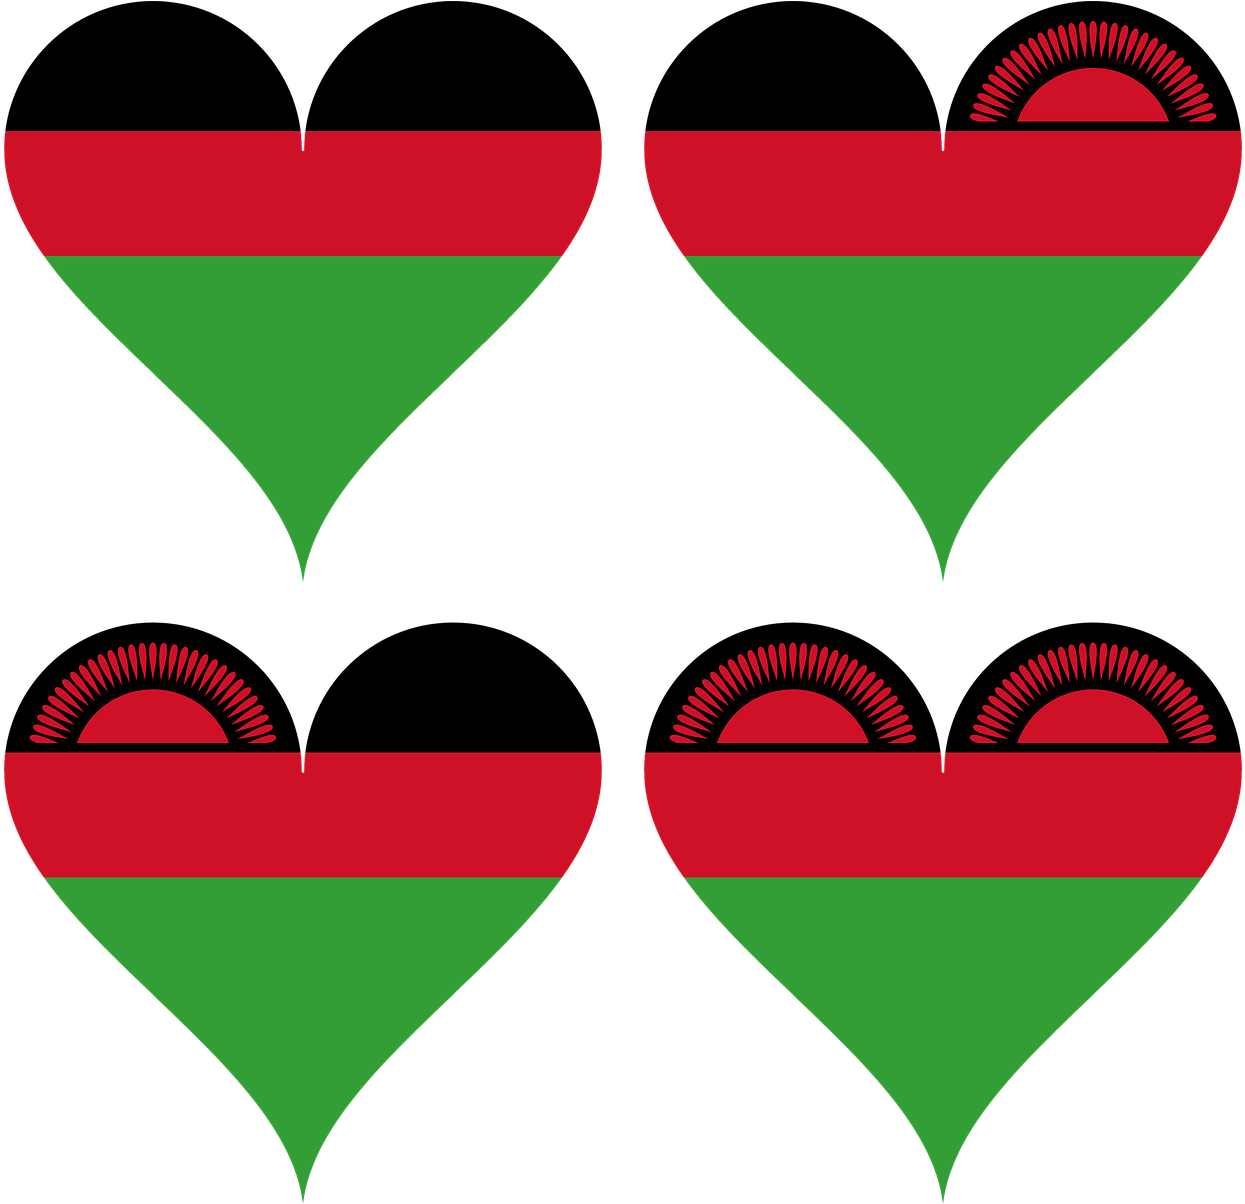 A Heart Shaped Red And Green Flag